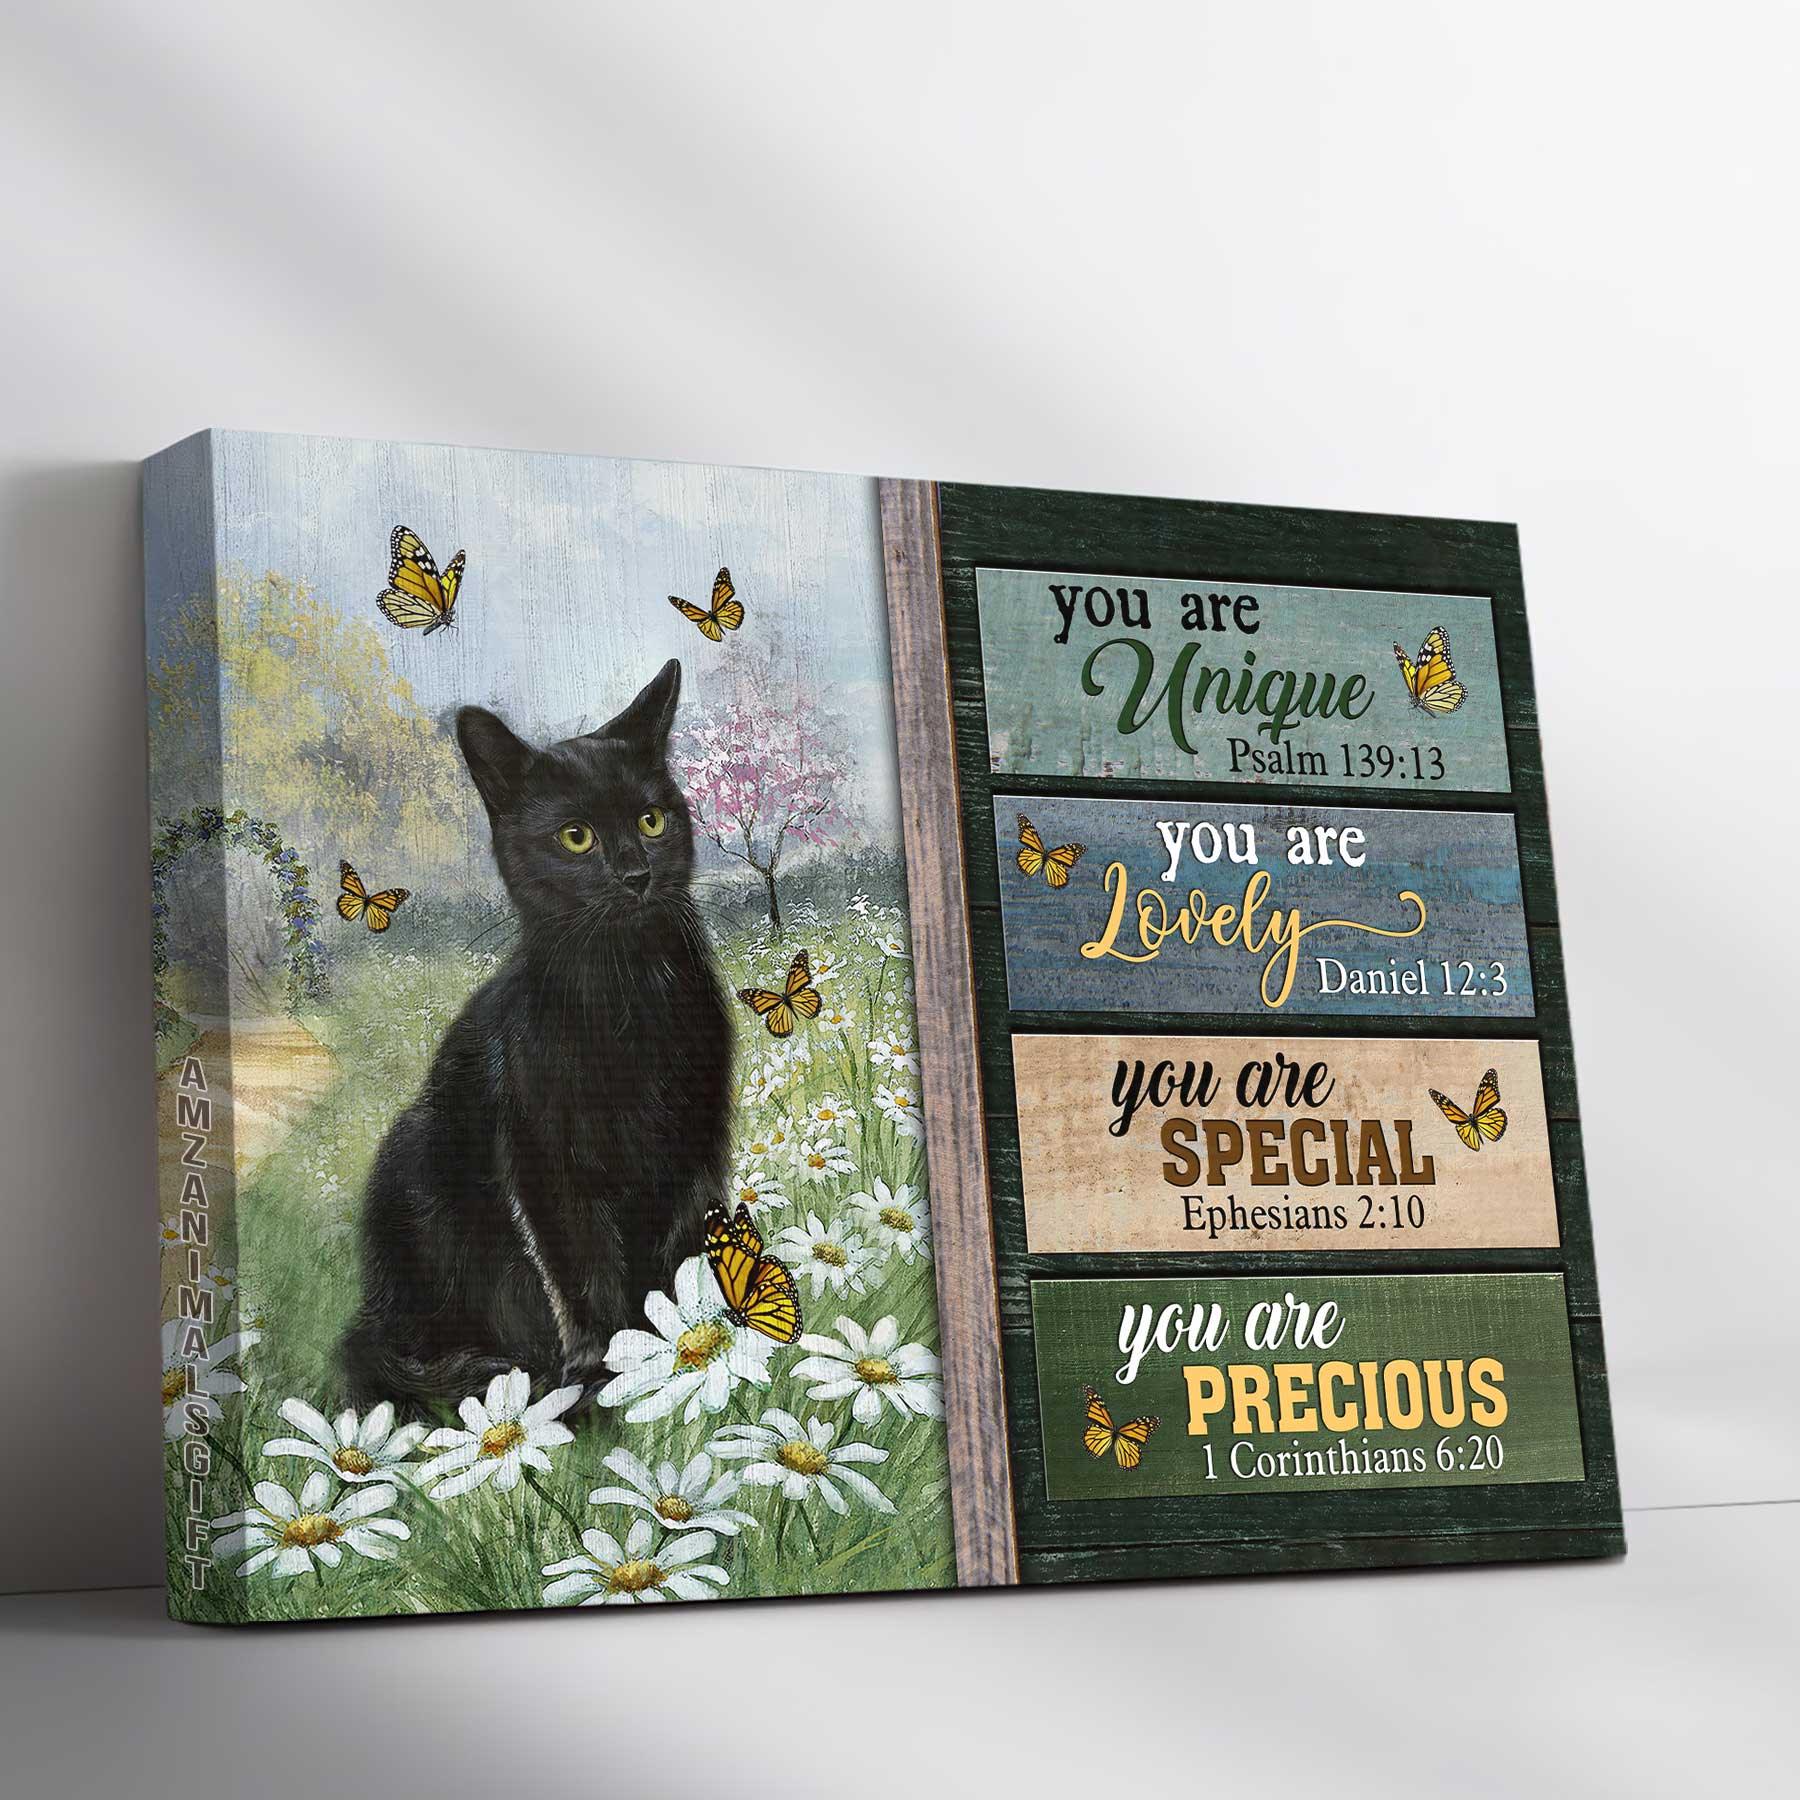 Black Cat & Jesus Premium Wrapped Landscape Canvas - Black Cat, Daisy Field, Monarch Butterfly, You Are Unique - Gift For Christian, Cat Lovers - Amzanimalsgift